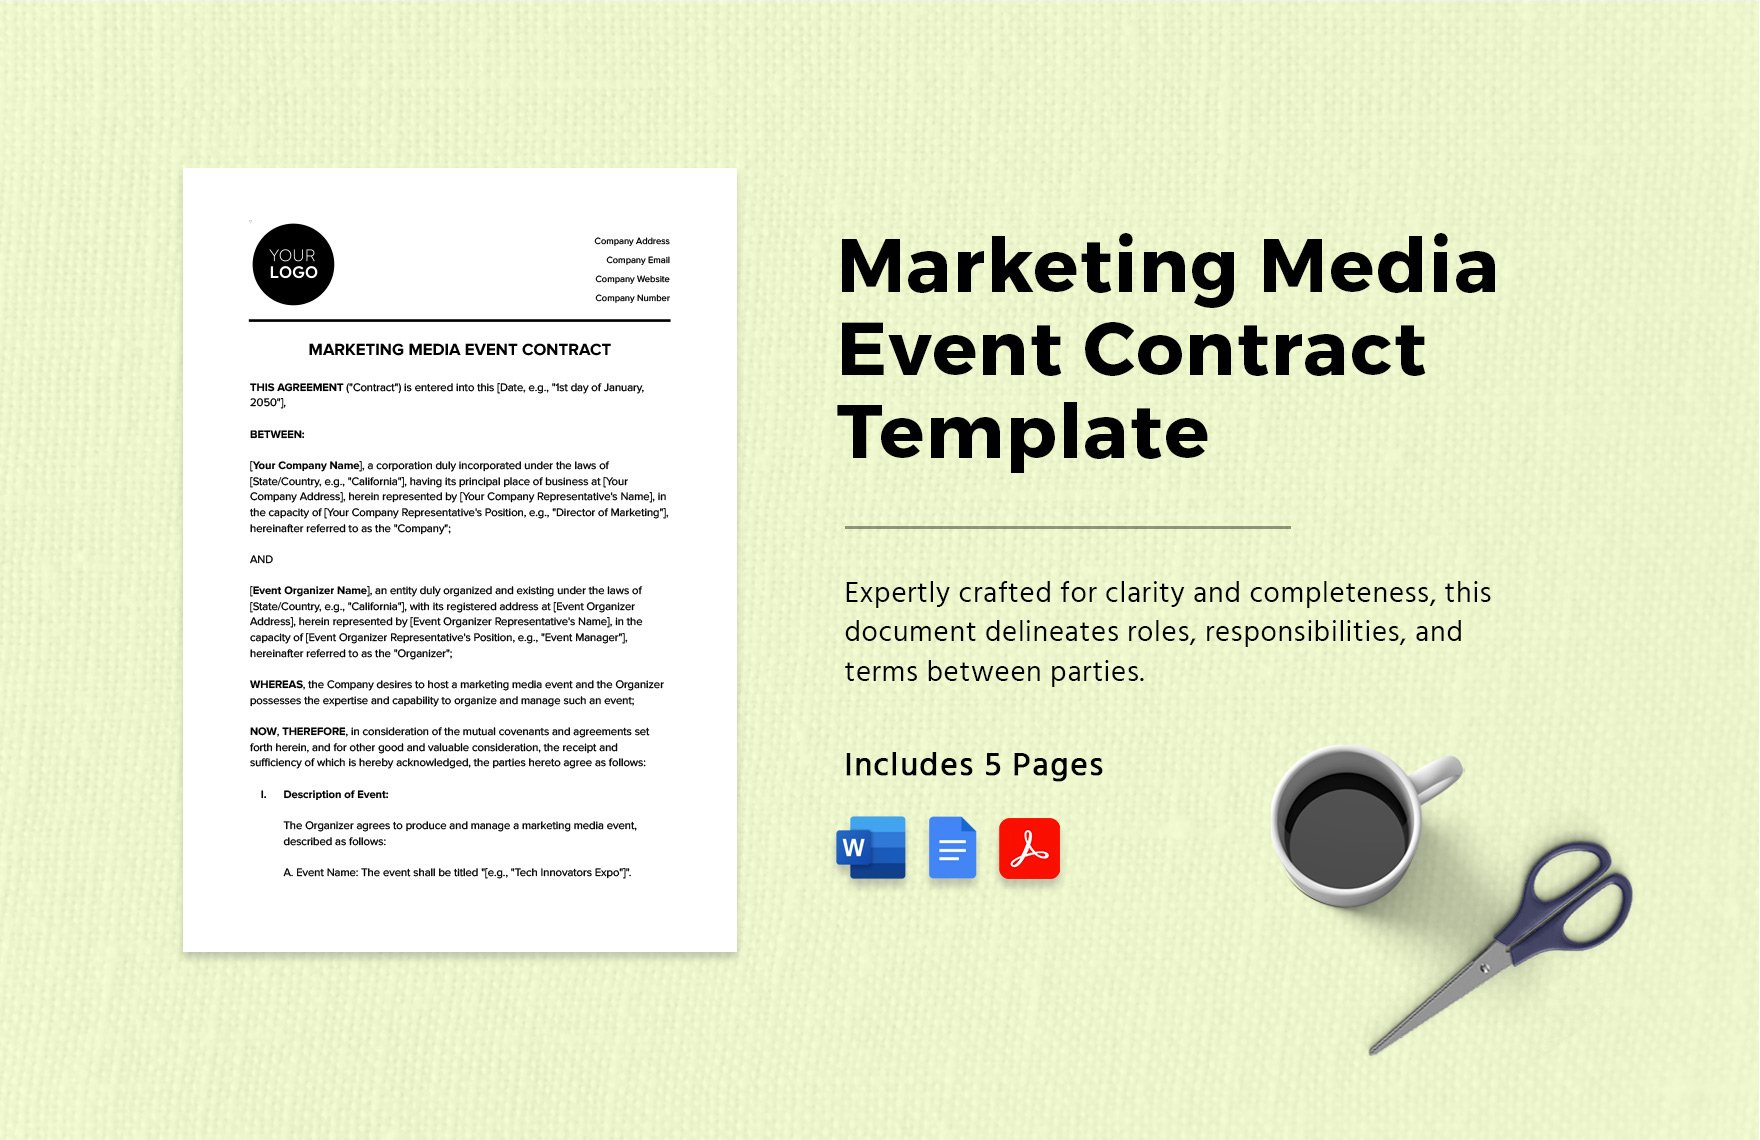 Marketing Media Event Contract Template in Word, Google Docs, PDF